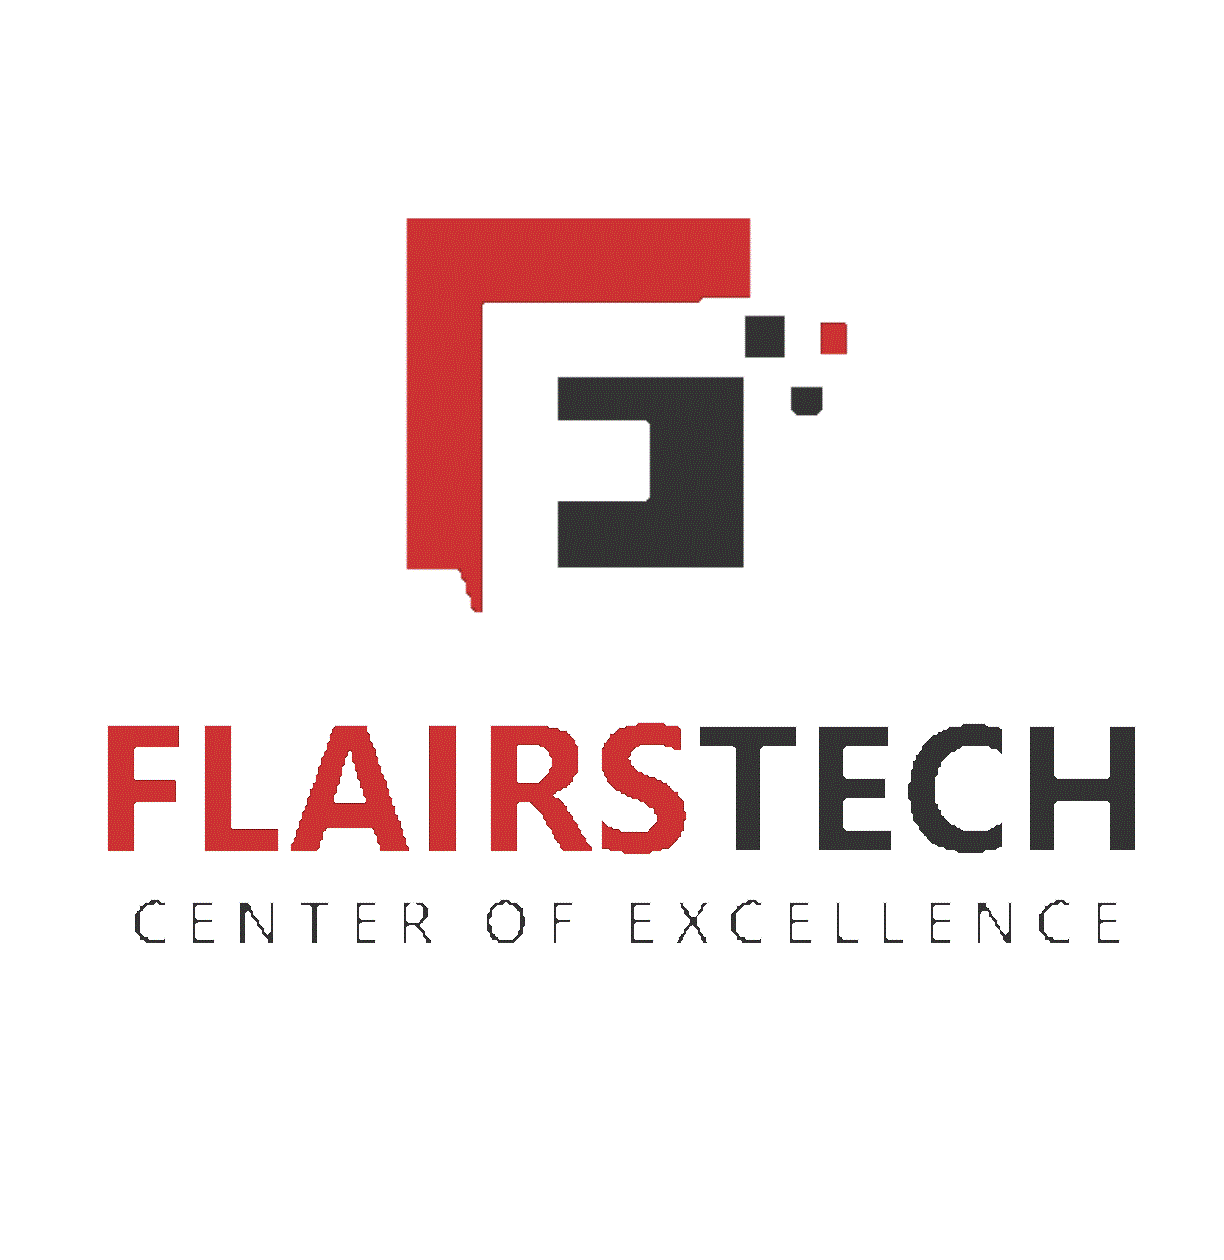 Flairstech